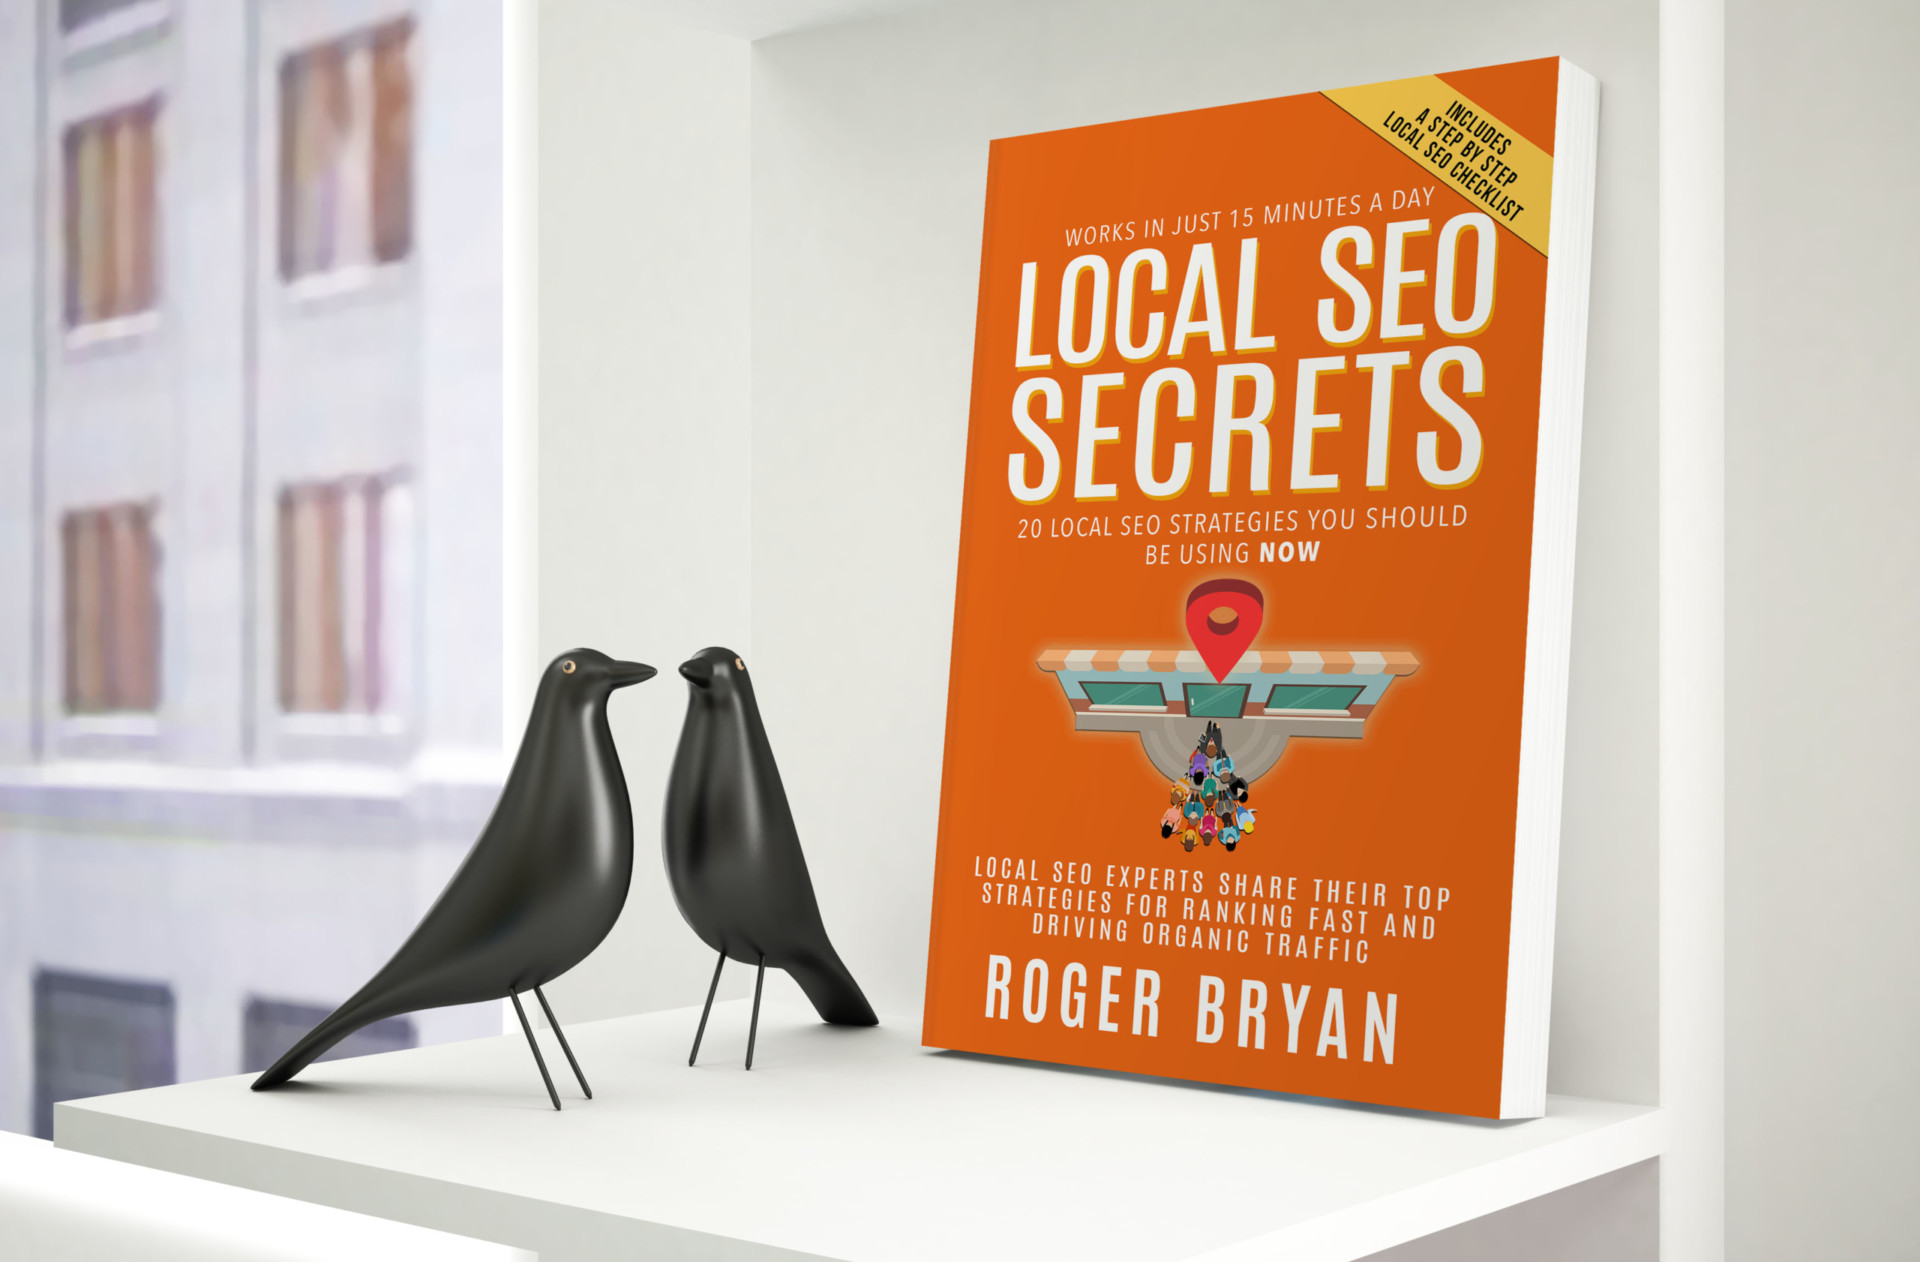 SEO Consultant Roger Bryan Hits Amazon Best Seller Lists with “Local SEO Secrets“